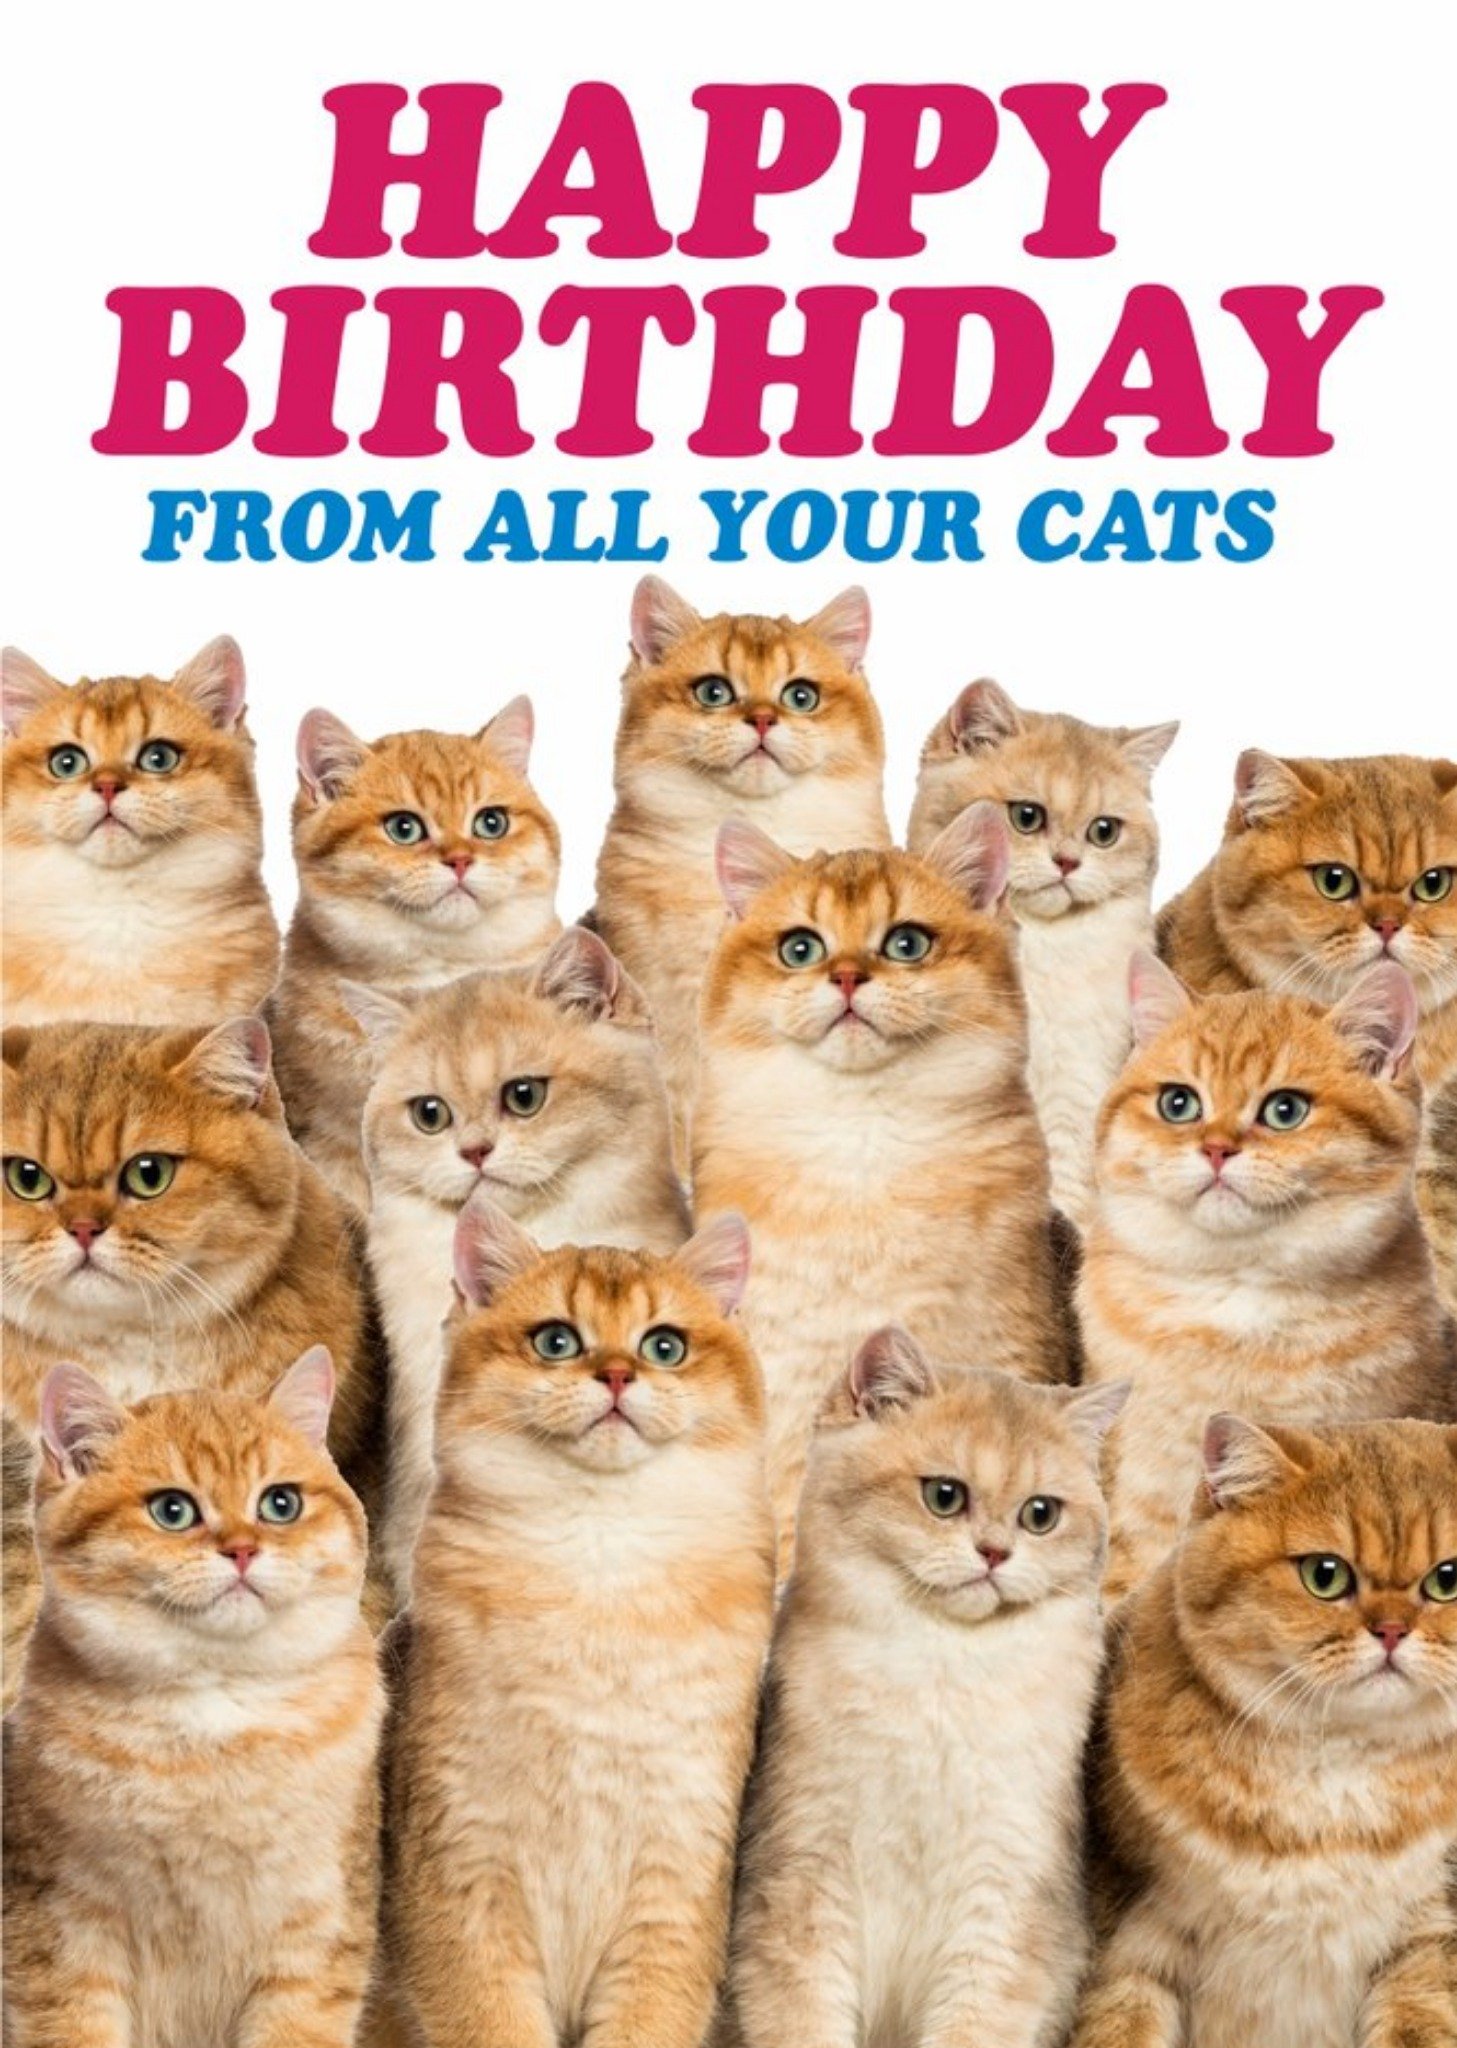 Moonpig Dean Morris From All You Cats Birthday Card Ecard